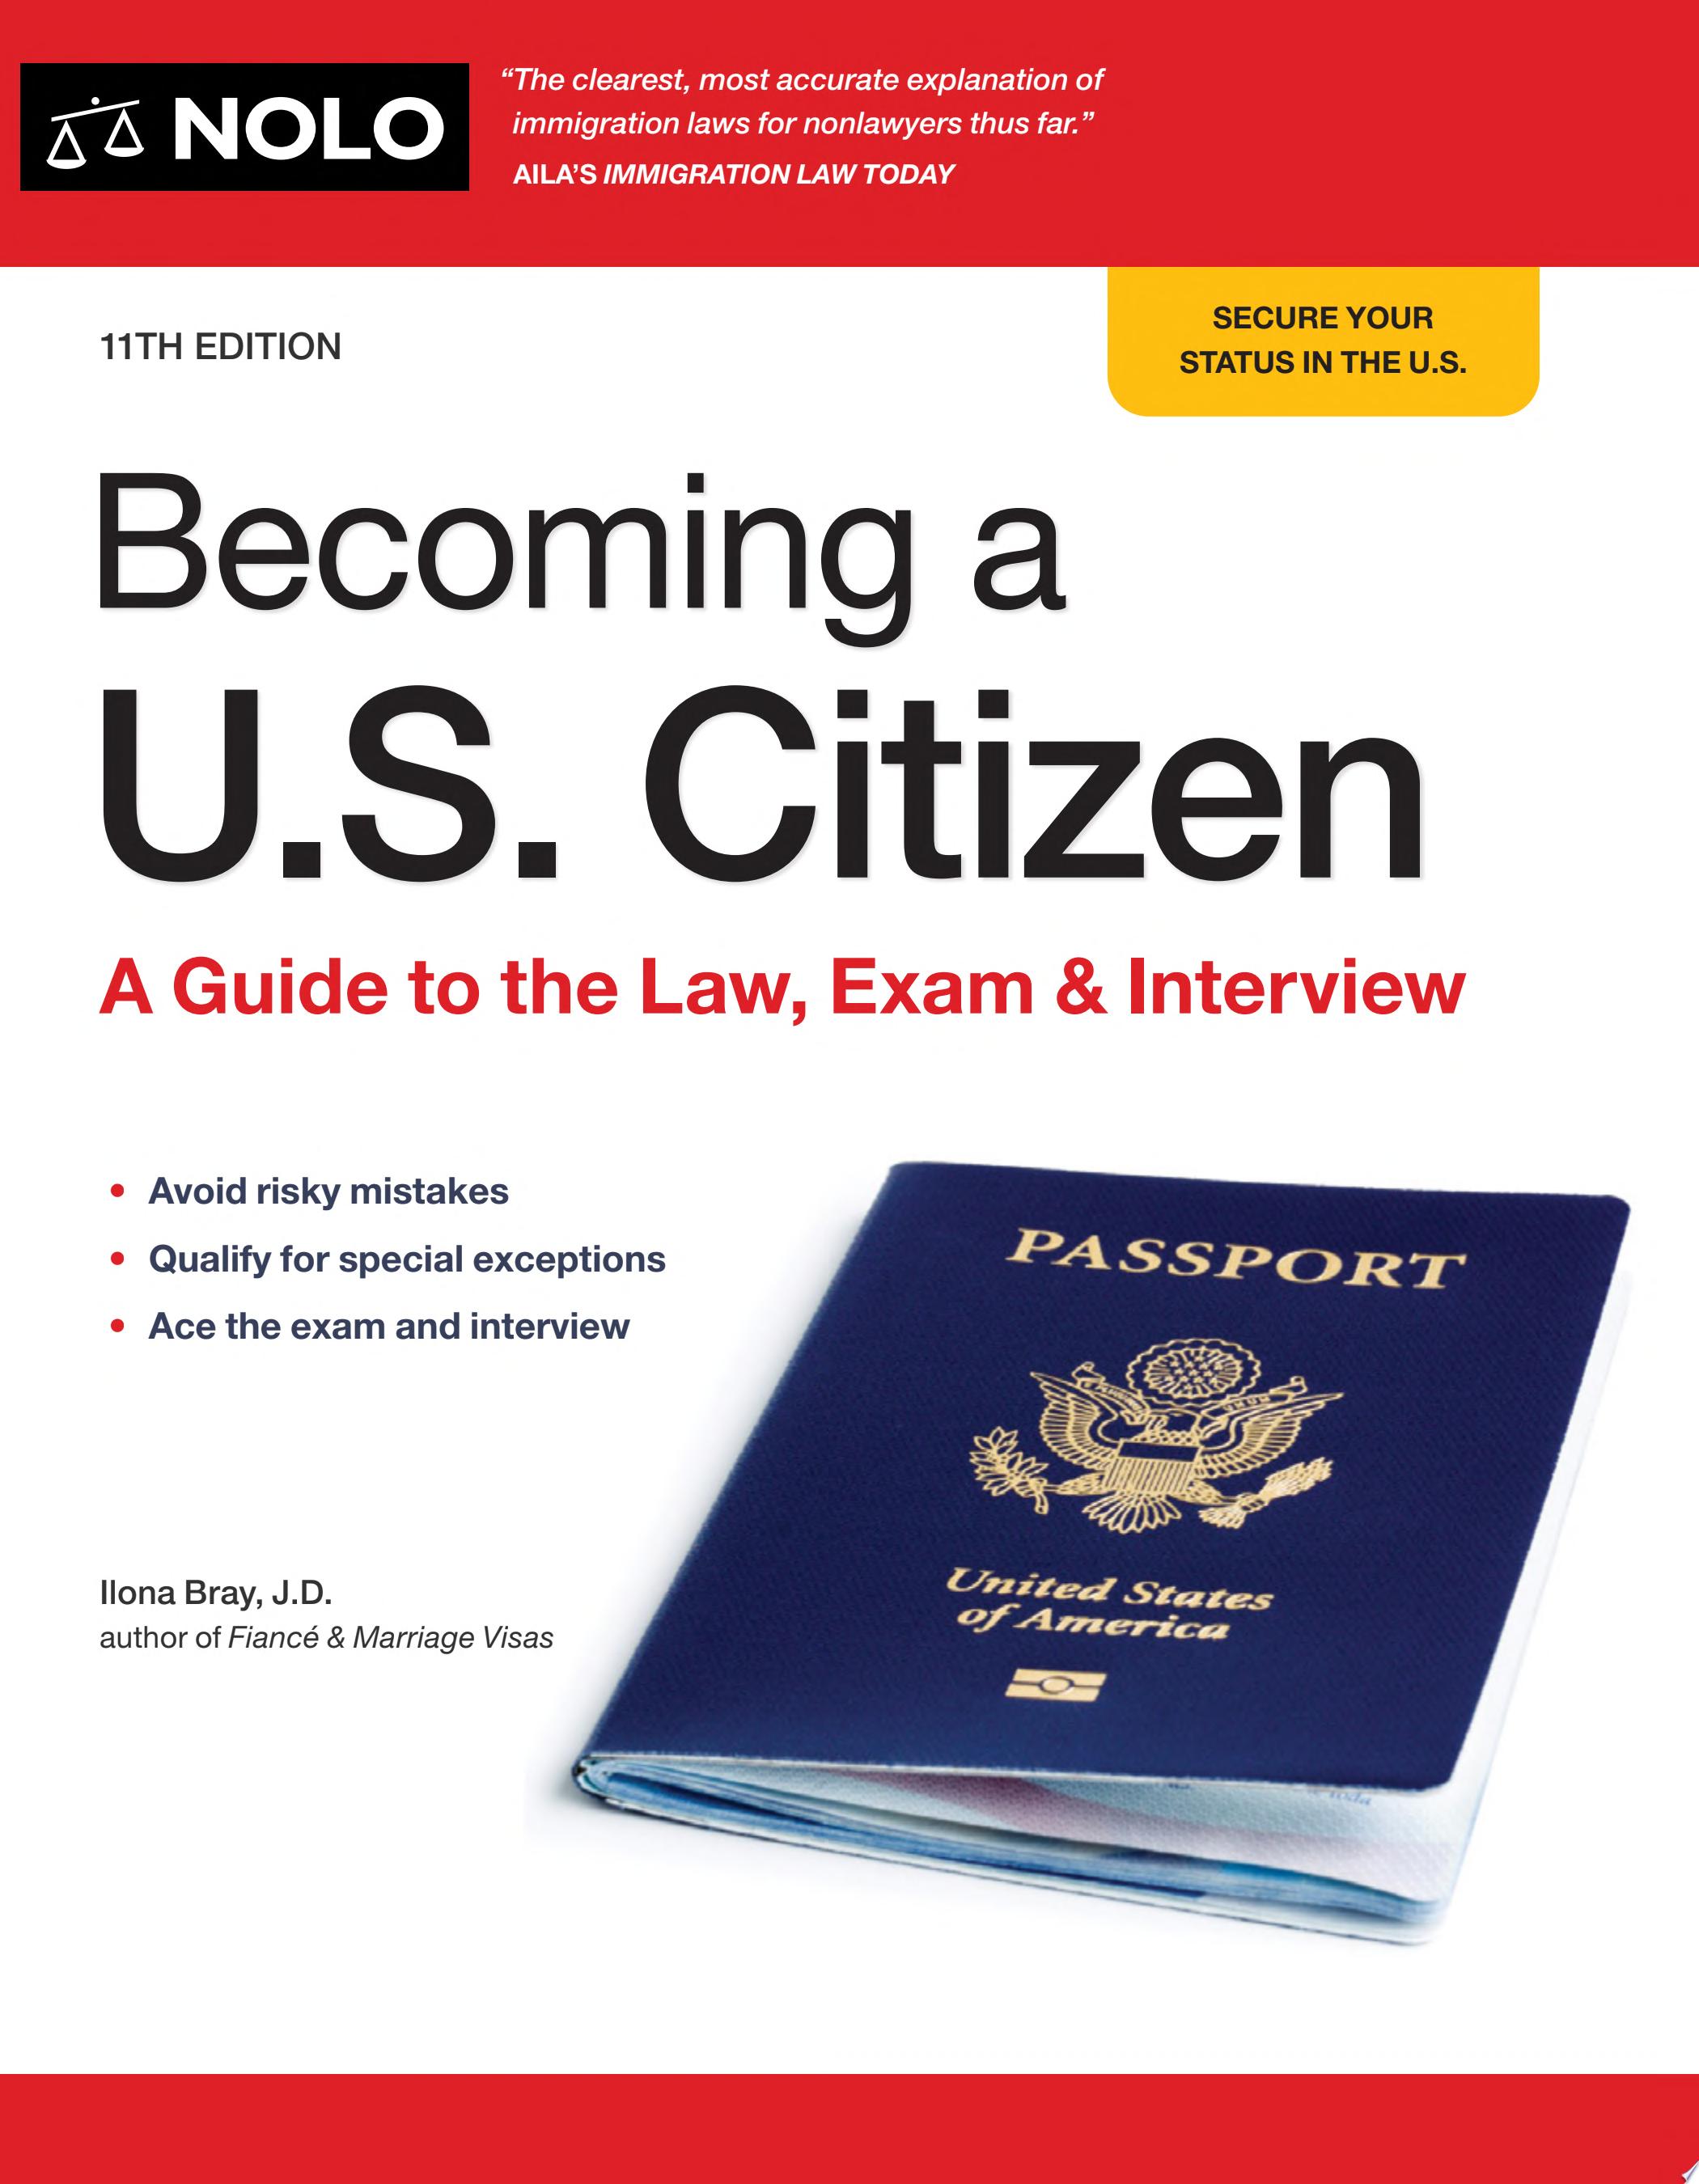 Image for "Becoming a U.S. Citizen"